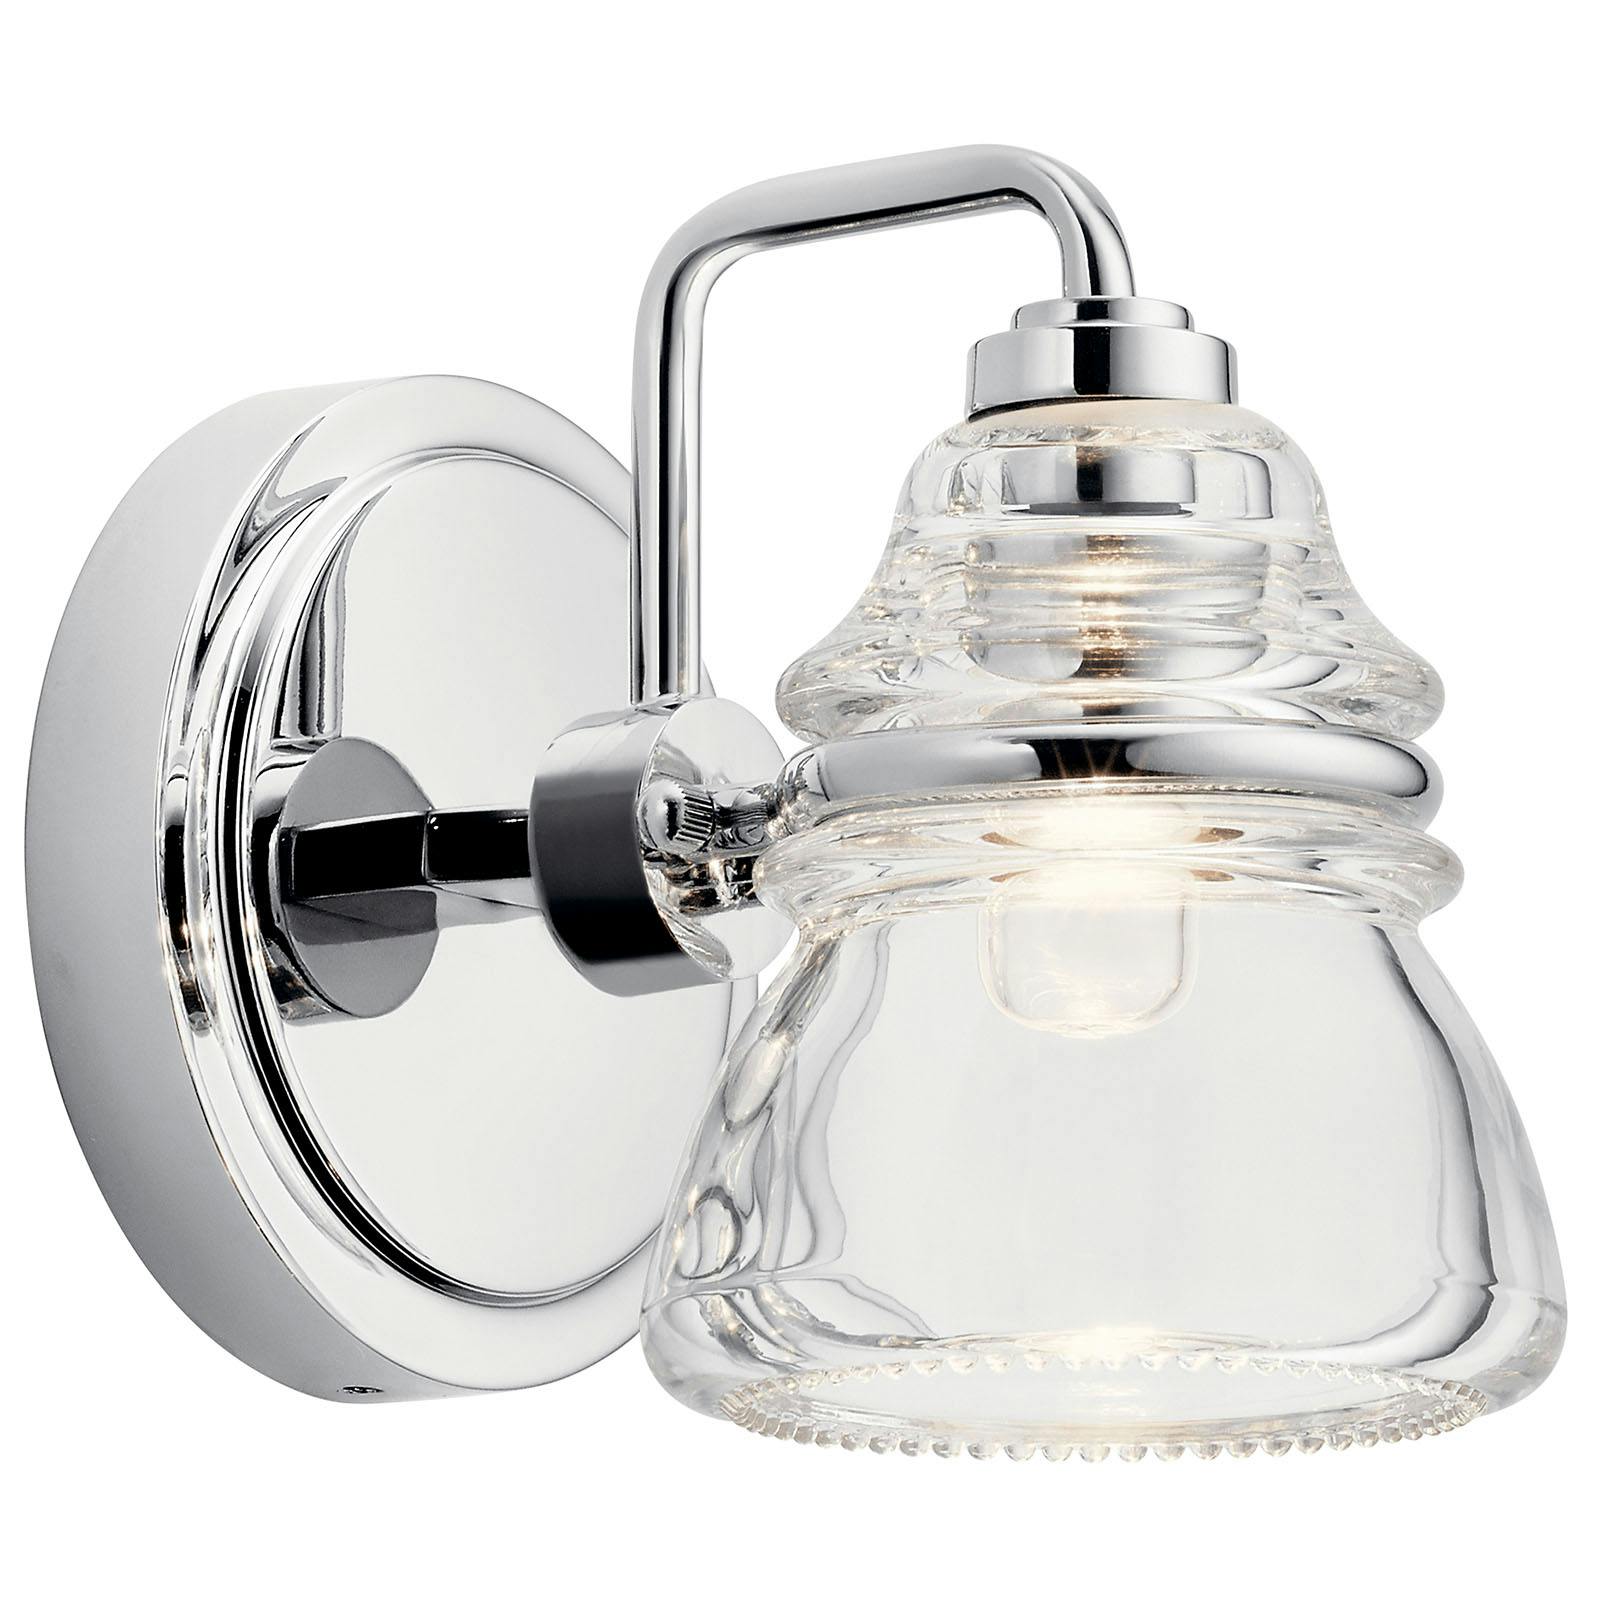 Talland 1 Light Wall Sconce Chrome on a white background